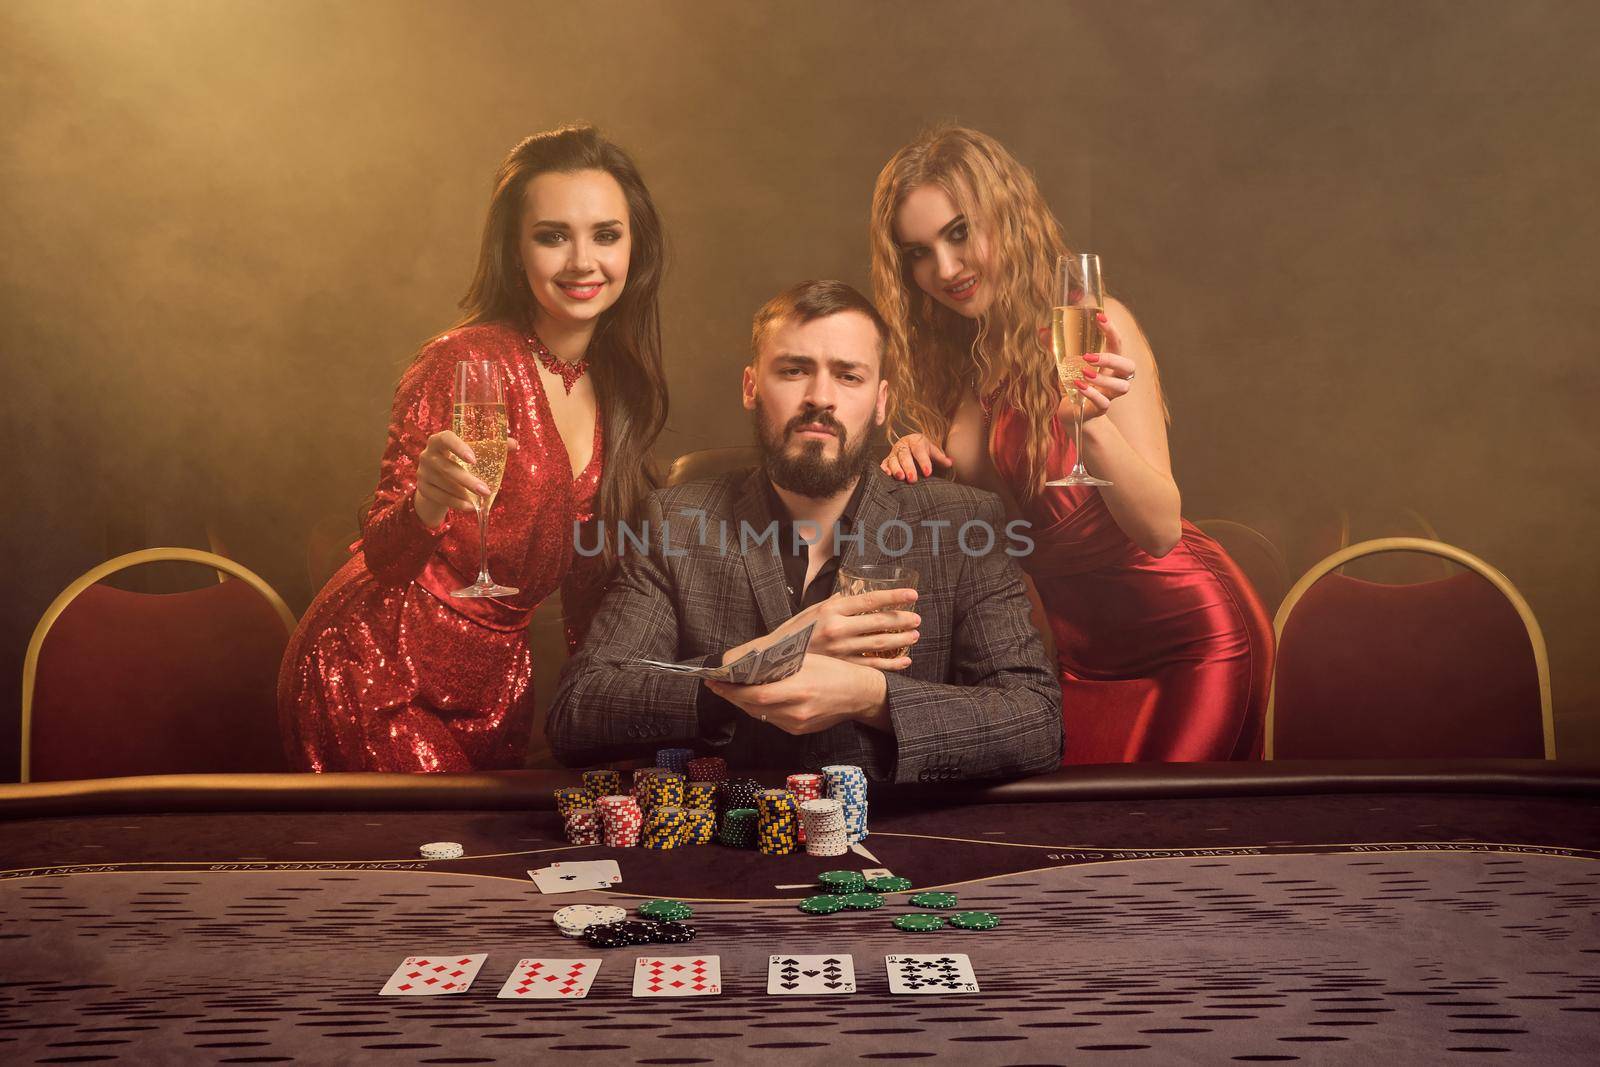 Two attractive girls and good-looking guy are playing poker at casino. They are holding their cash winning, smiling and looking at the camera while posing at the table against a yellow backlight on smoke background. Cards, chips, money, gambling, entertainment concept.